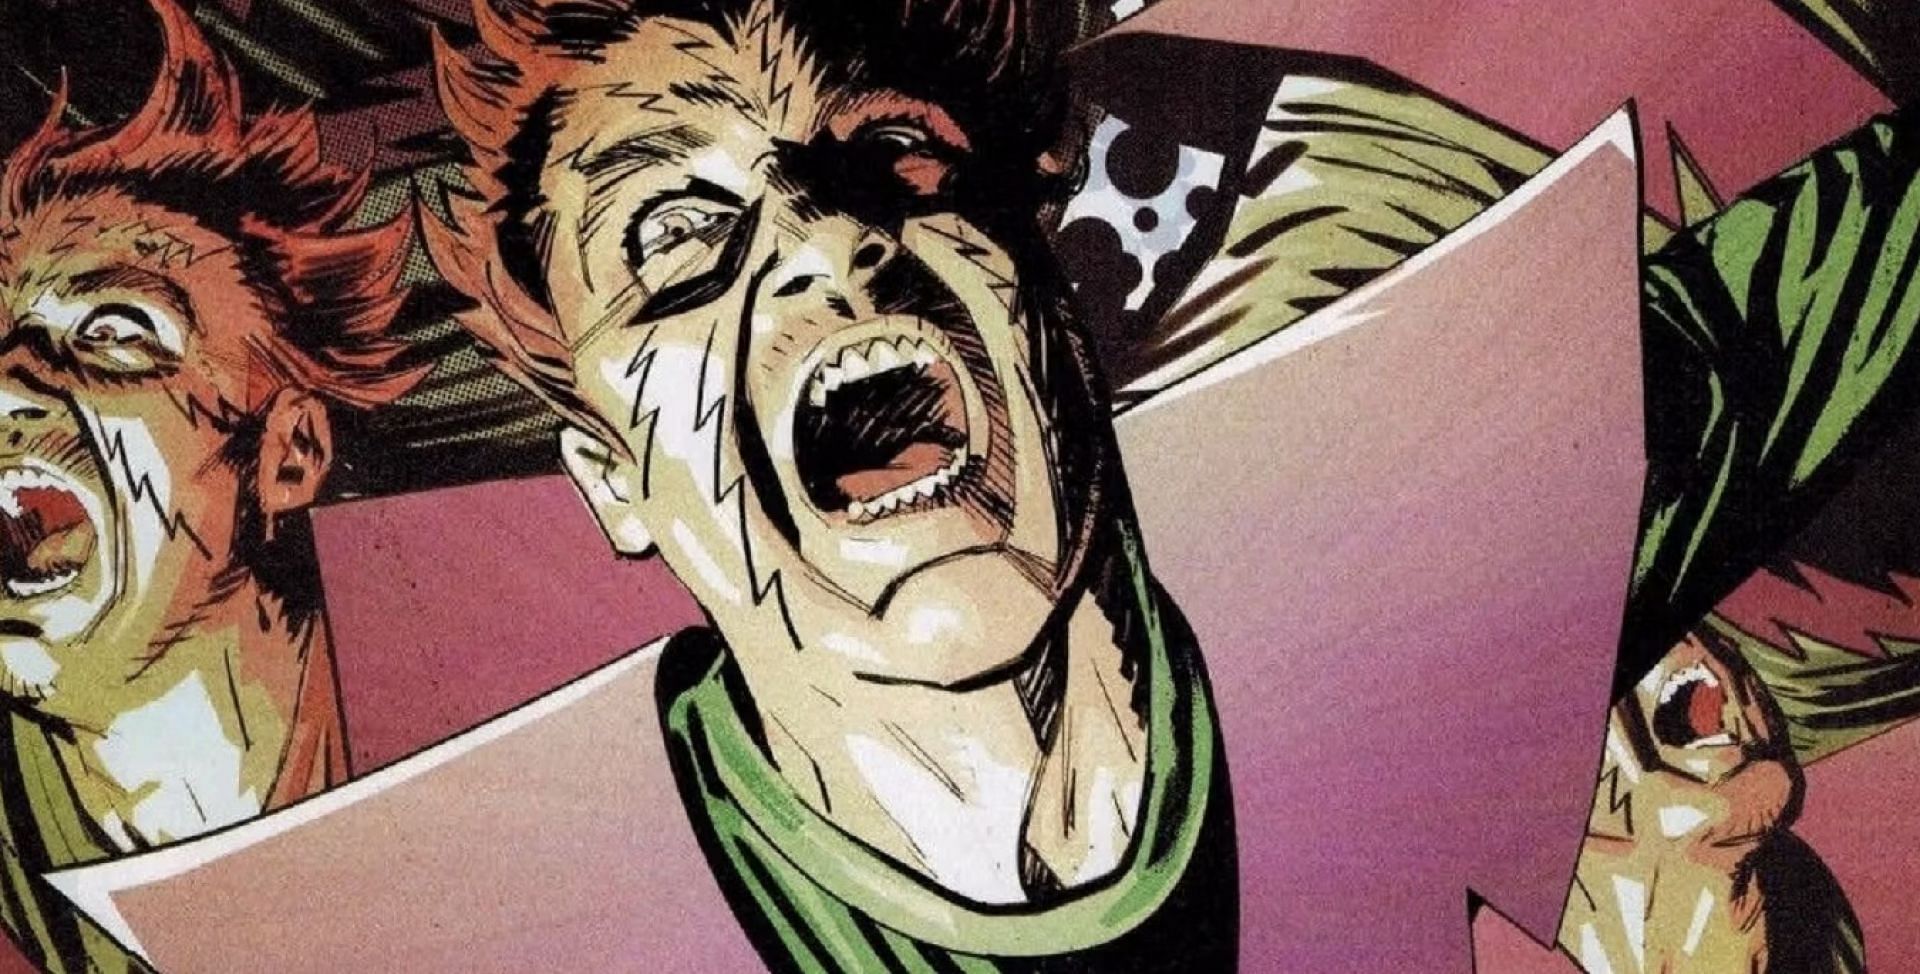 Molecule Man has a rich and complex backstory, with different portrayals ranging from a villain to a tormented figure seeking redemption (Image via Marvel Comics)